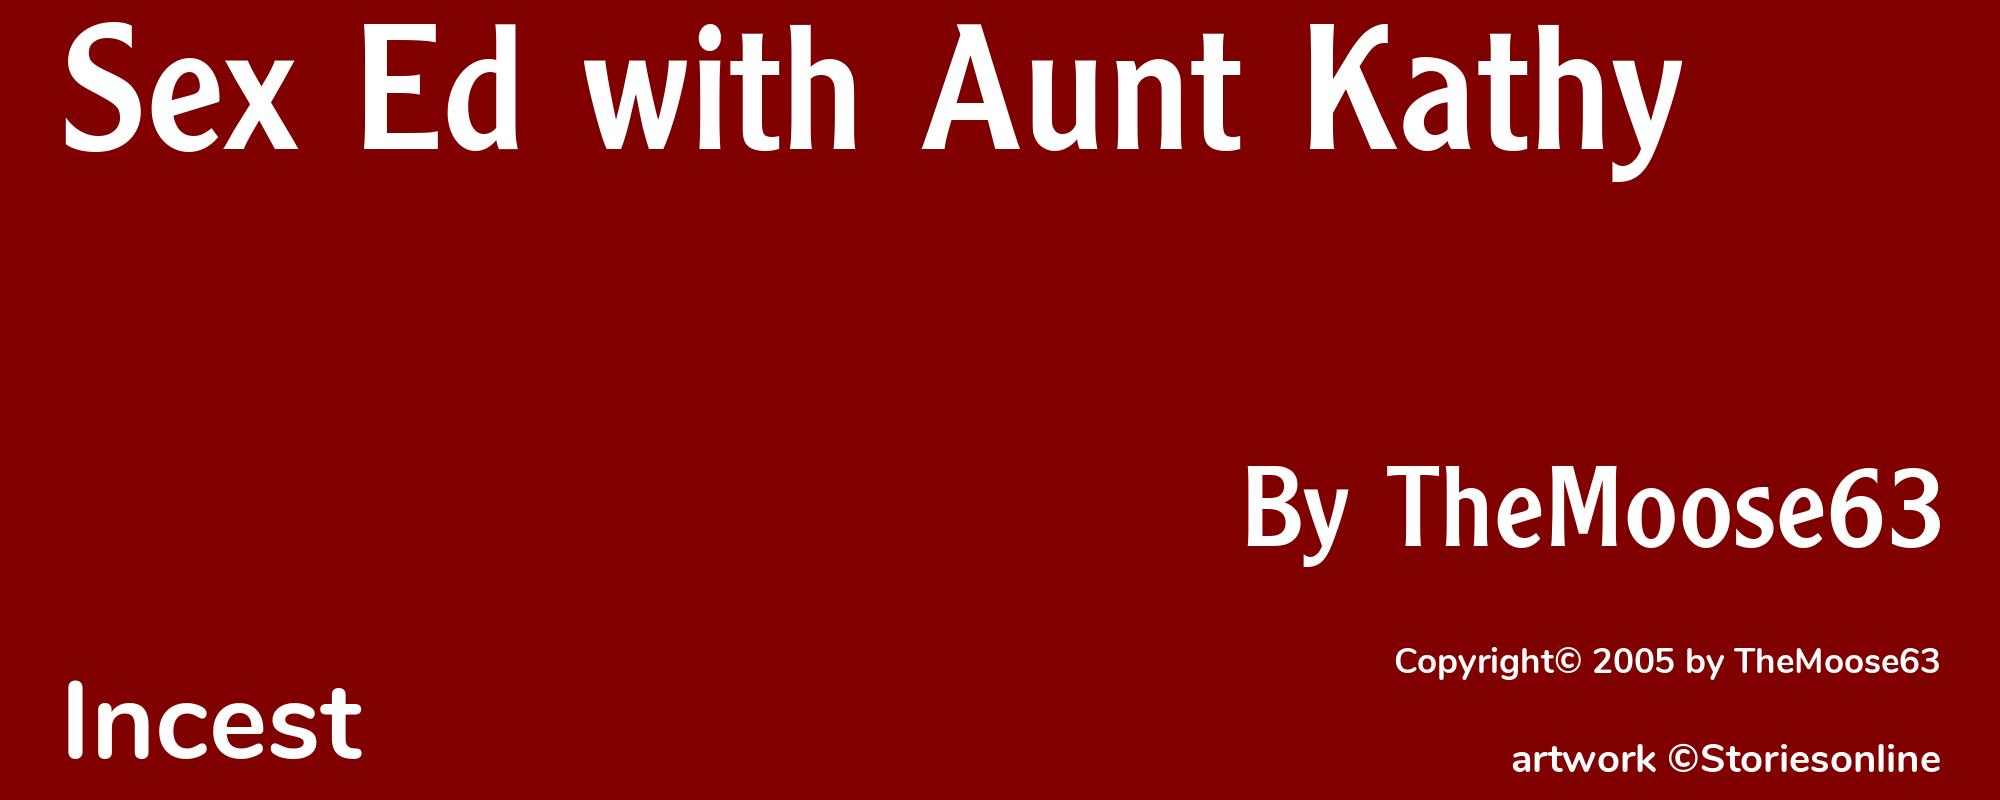 Sex Ed with Aunt Kathy - Cover